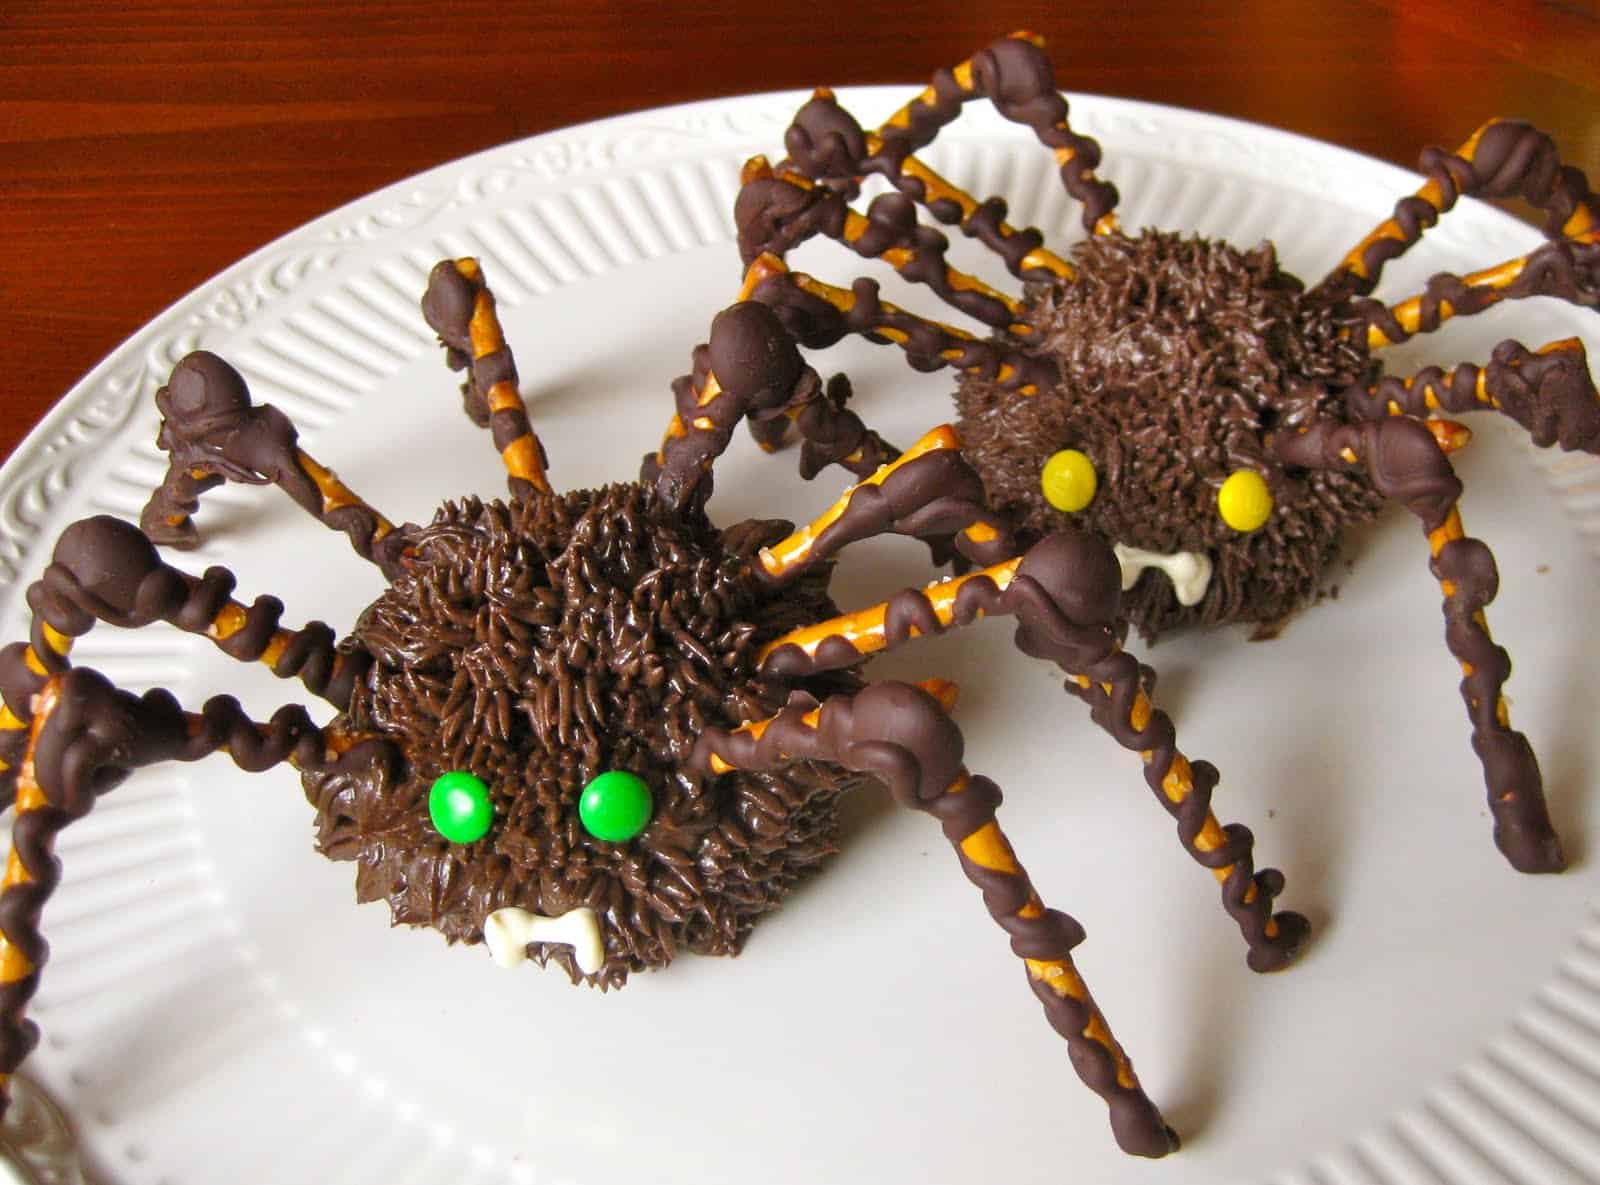 Two Spider Cupcakes with pretzel stick legs displayed on a white plate.